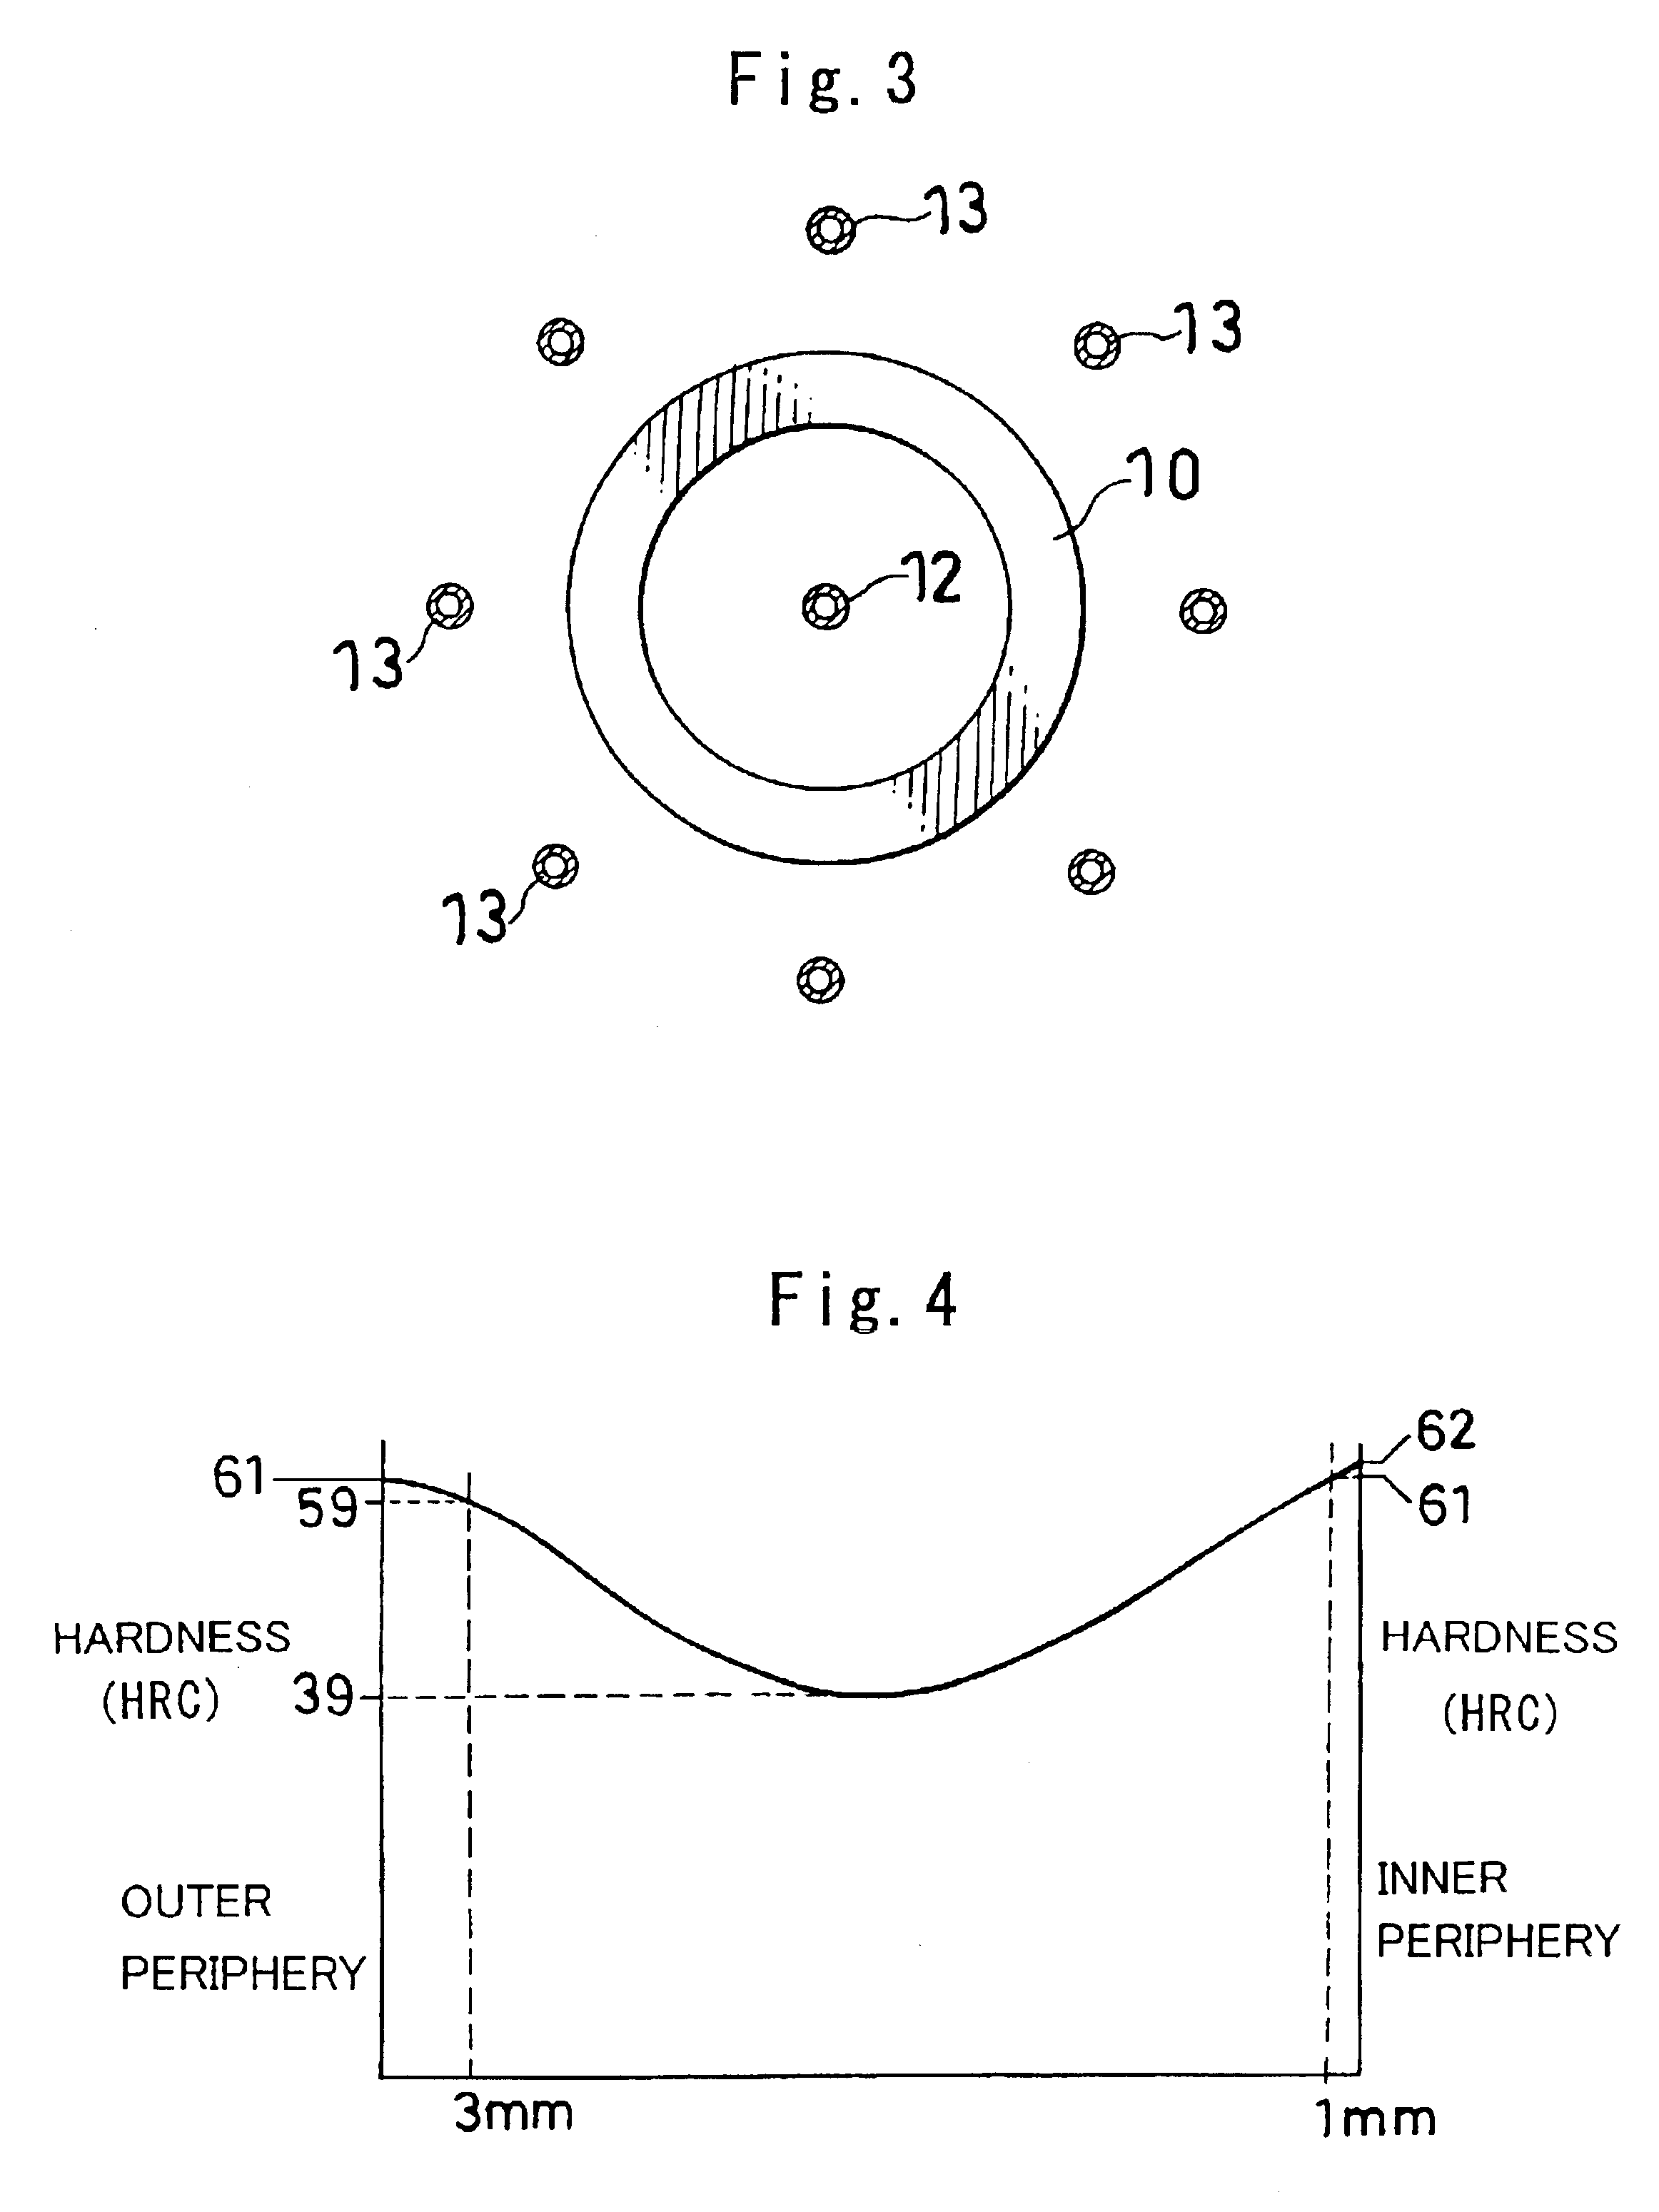 Antifriction bearing and process for producing outer race for use in antifriction bearing